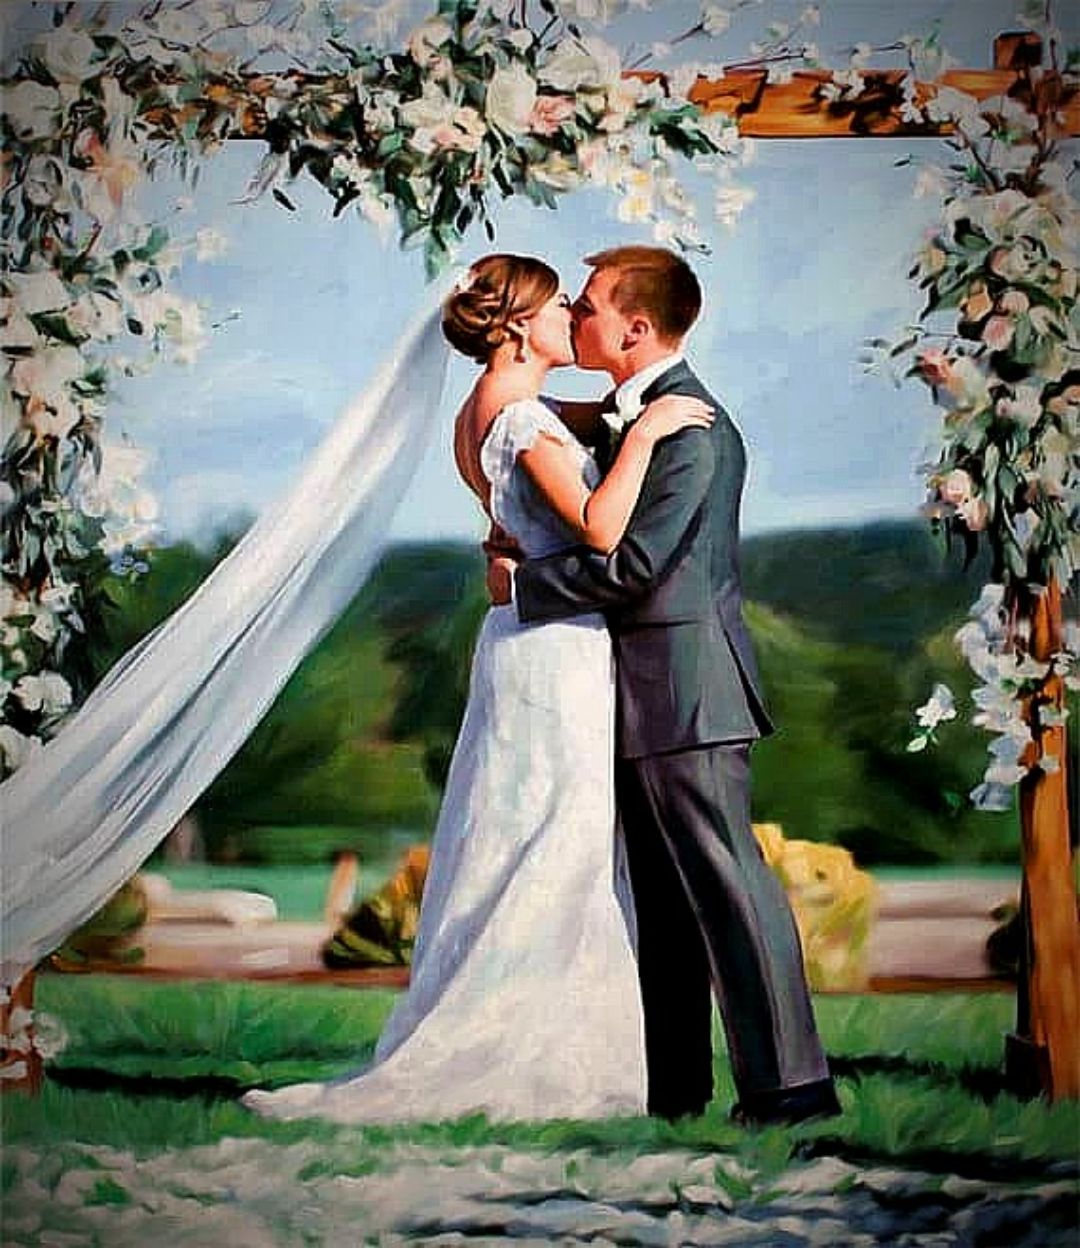 Personalized weeding hand painted Oil-Painting